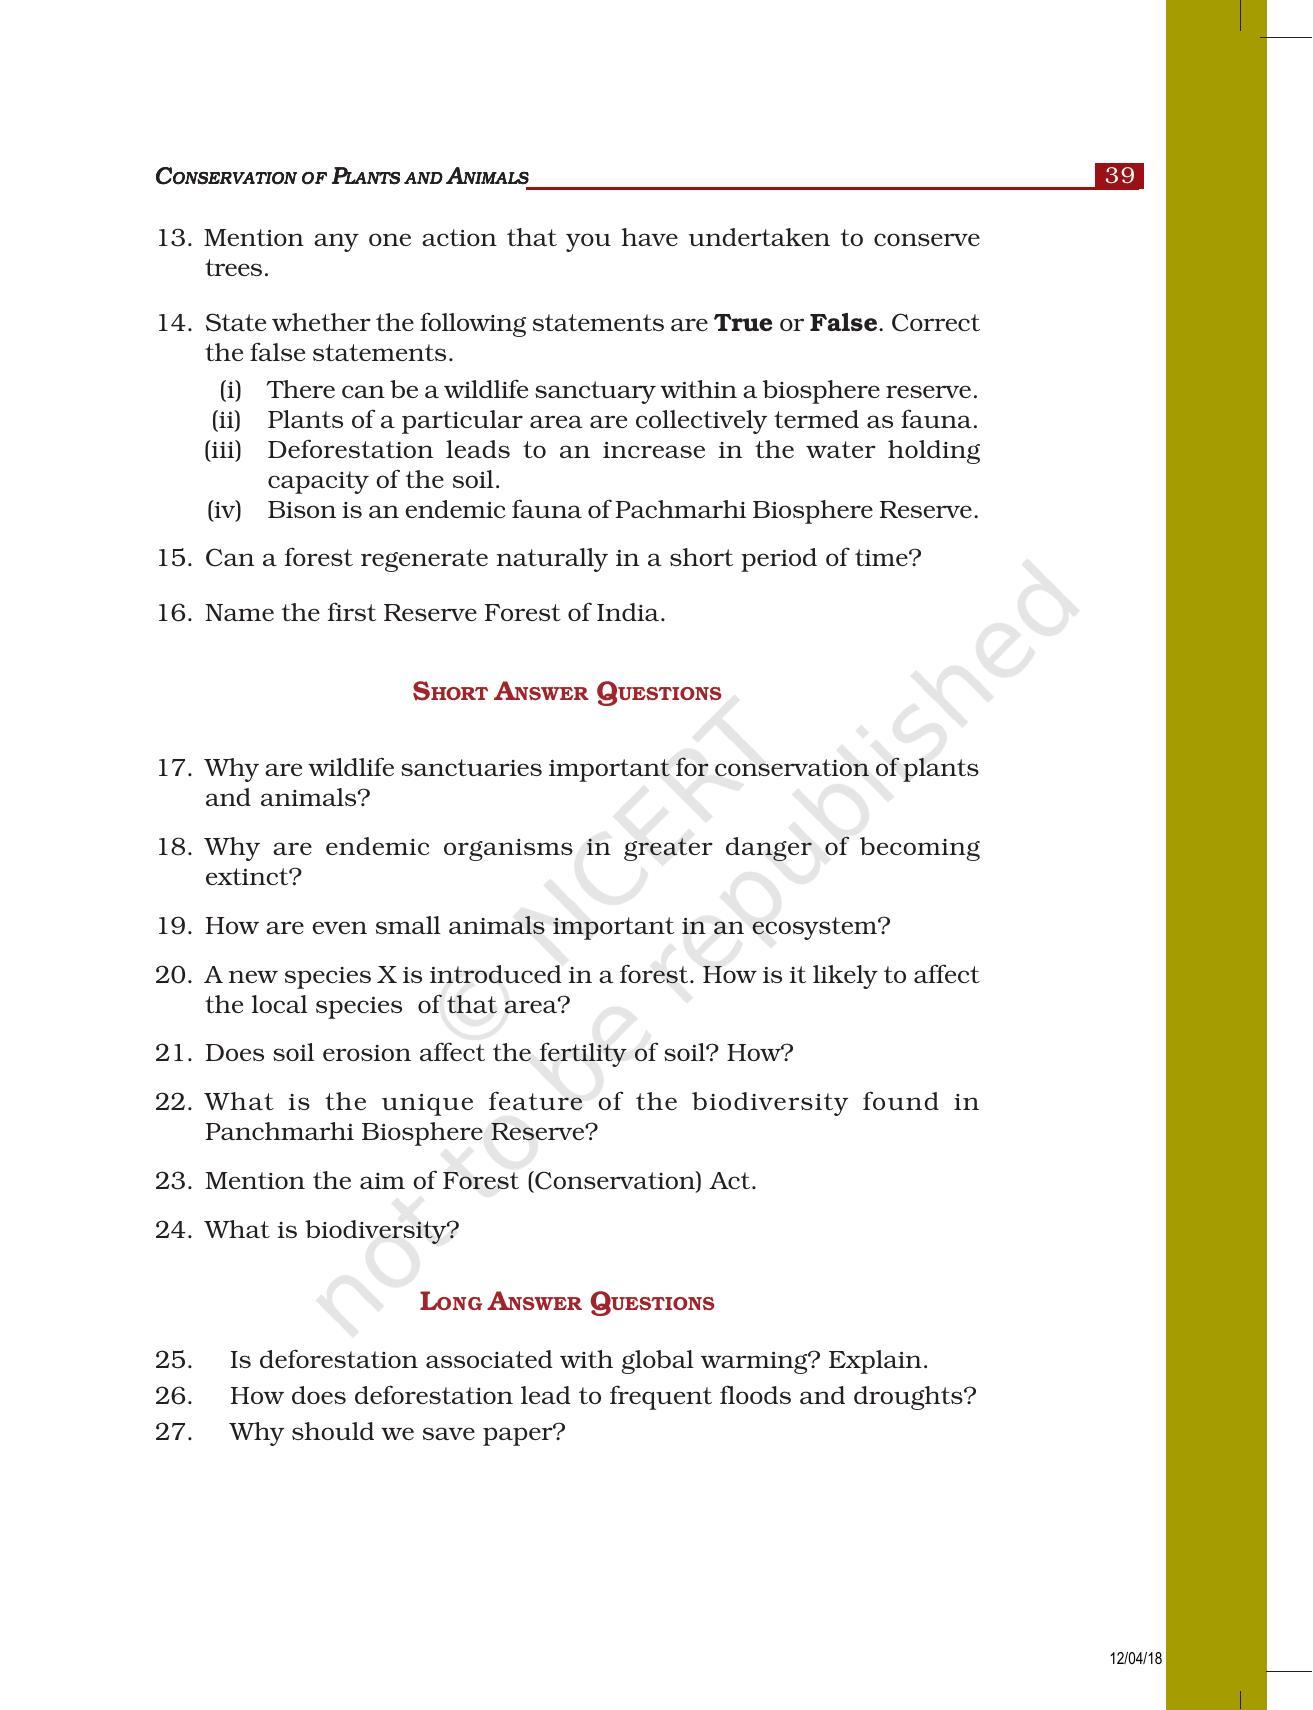 NCERT Exemplar Book for Class 8 Science: Chapter 7- Conservation of Plants and Animals - Page 3